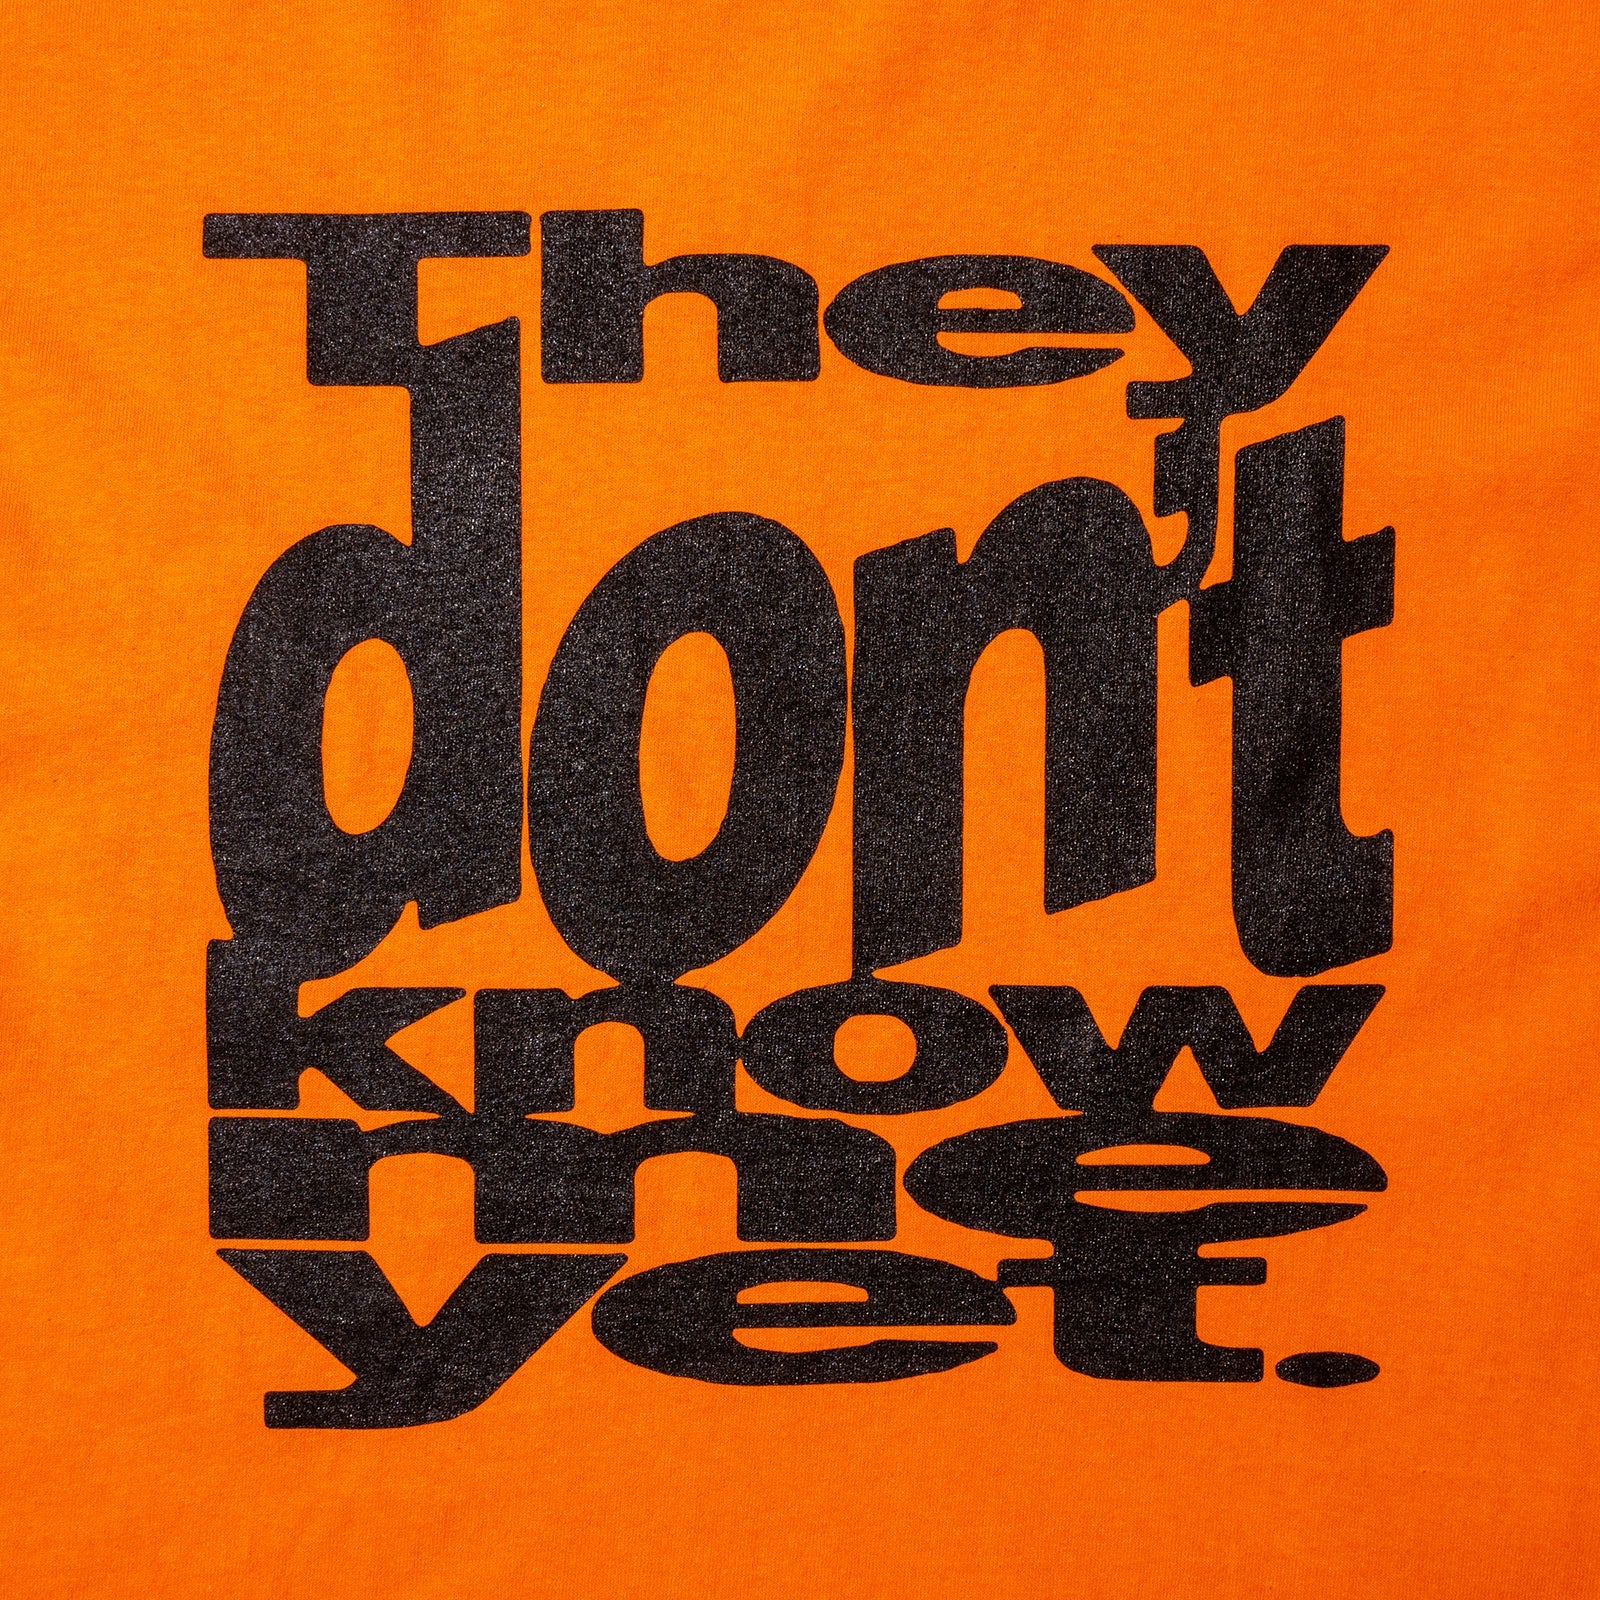 "They don't know me yet" long sleeve Tee